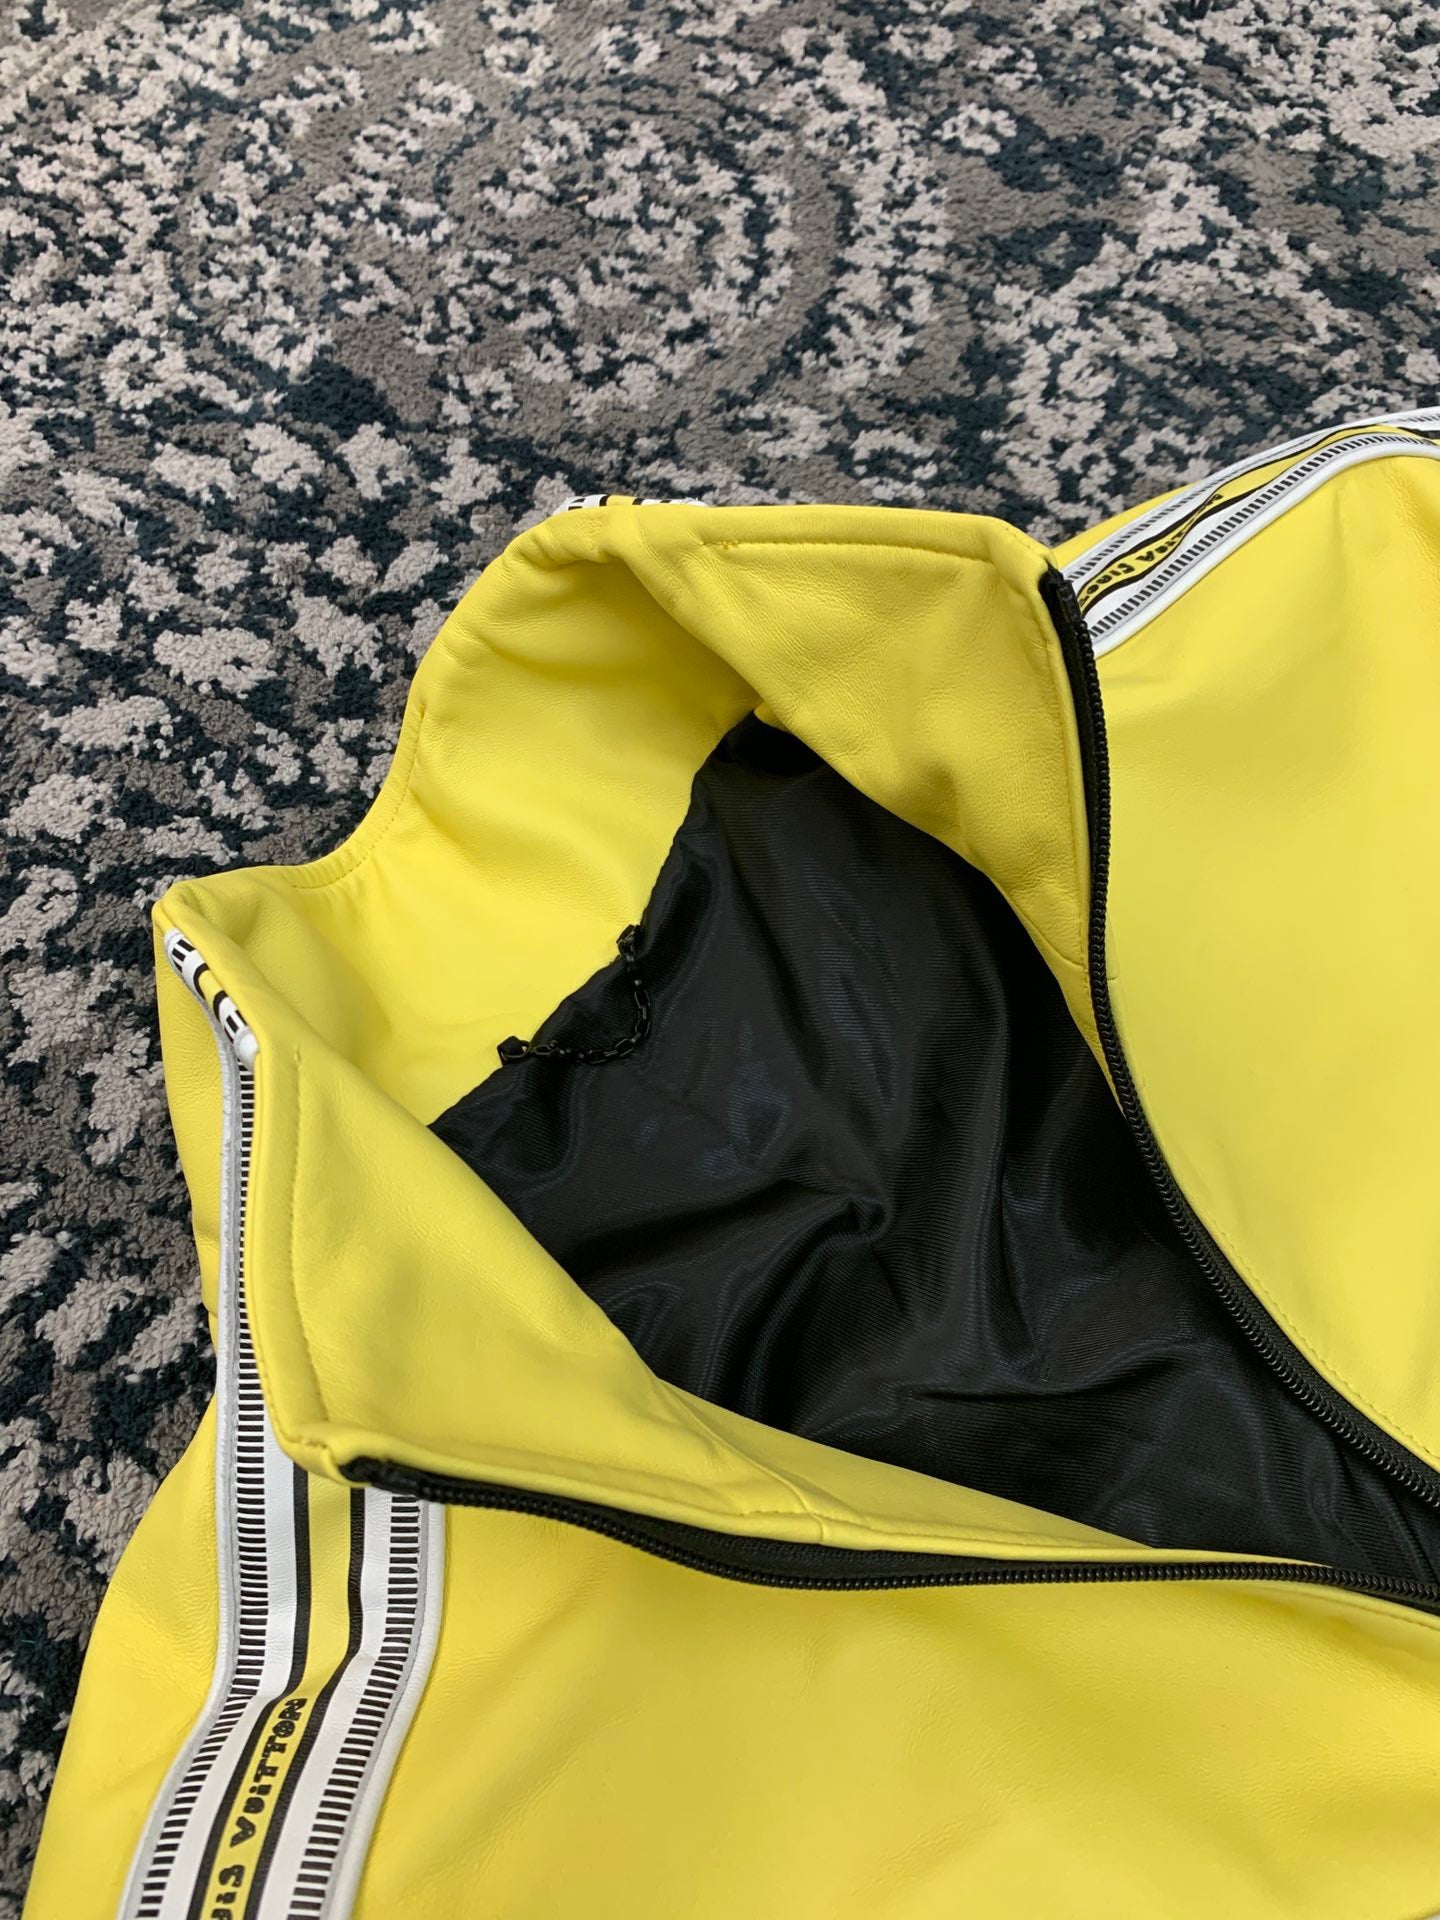 Black White and Yellow Black Jackets